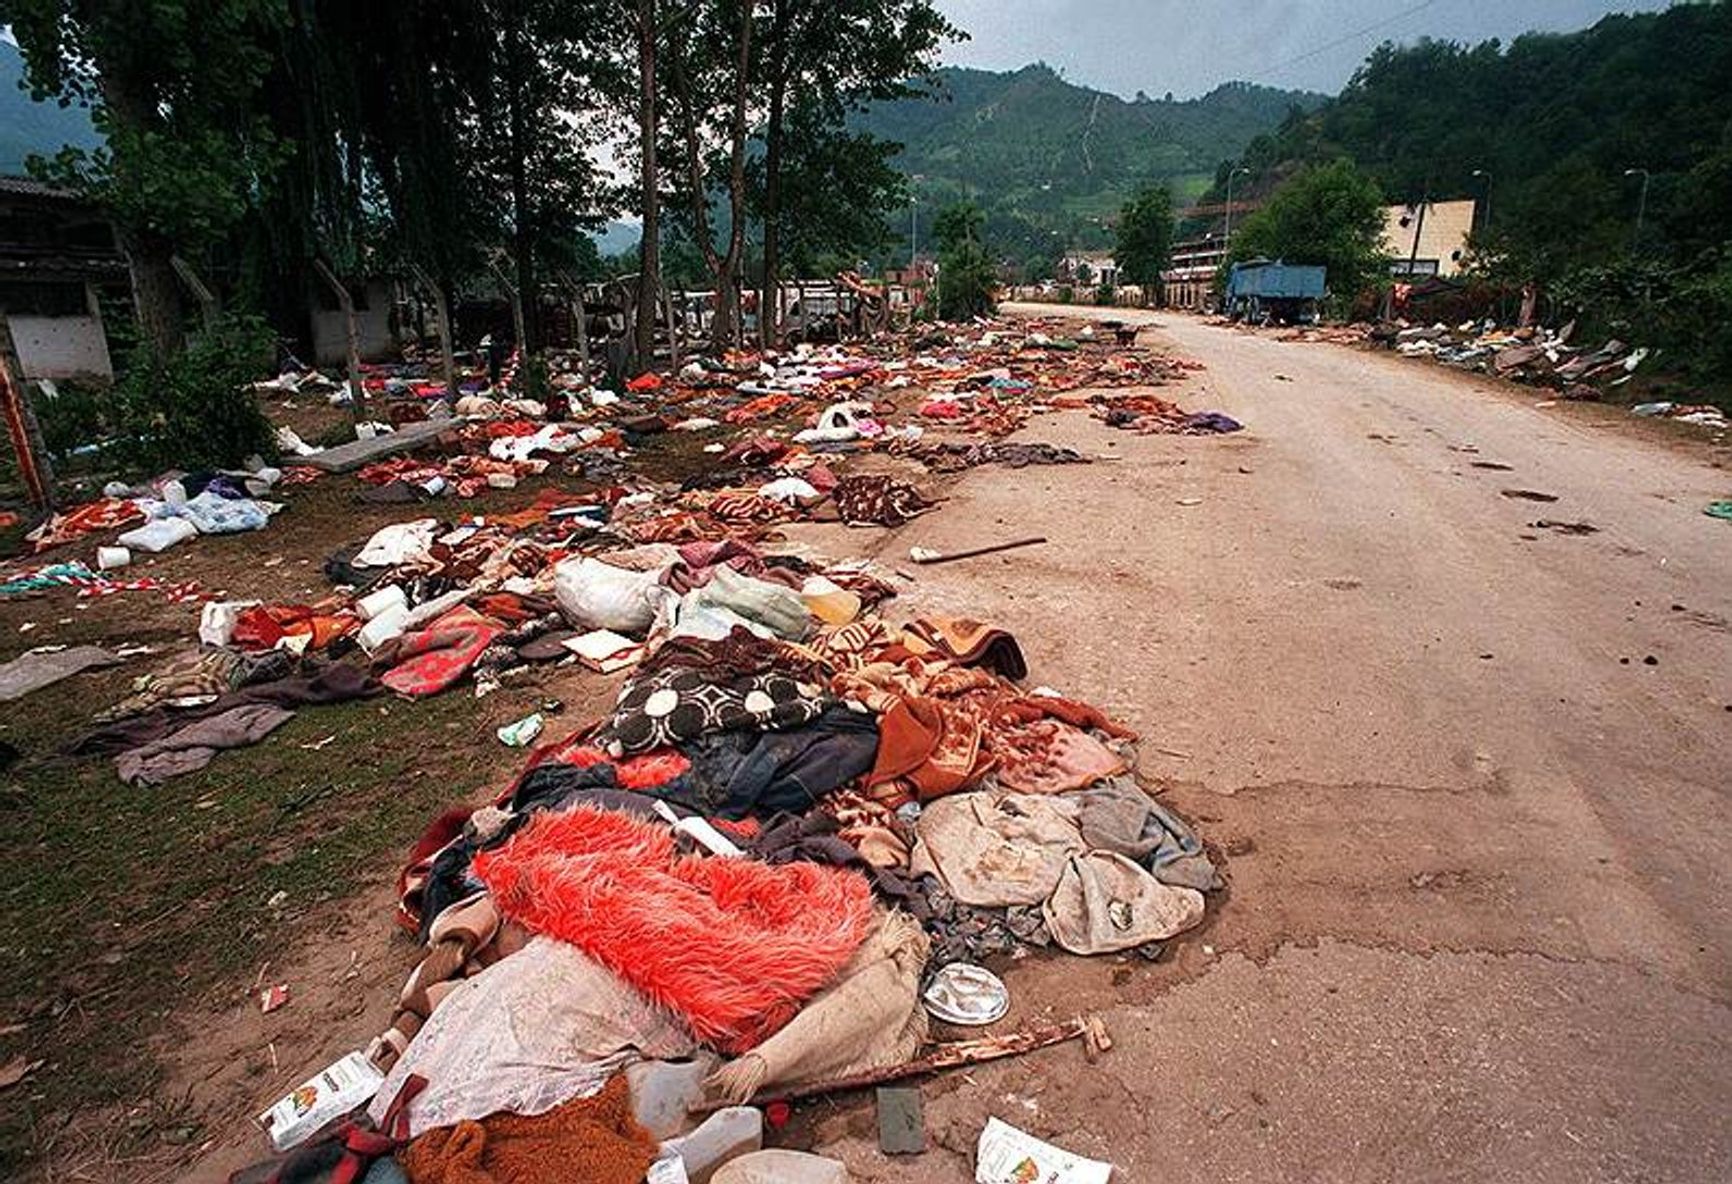 During the invasion of Srebrenica, Bosnian Serbs killed around 8,000 men and boys from Muslim families in 1995